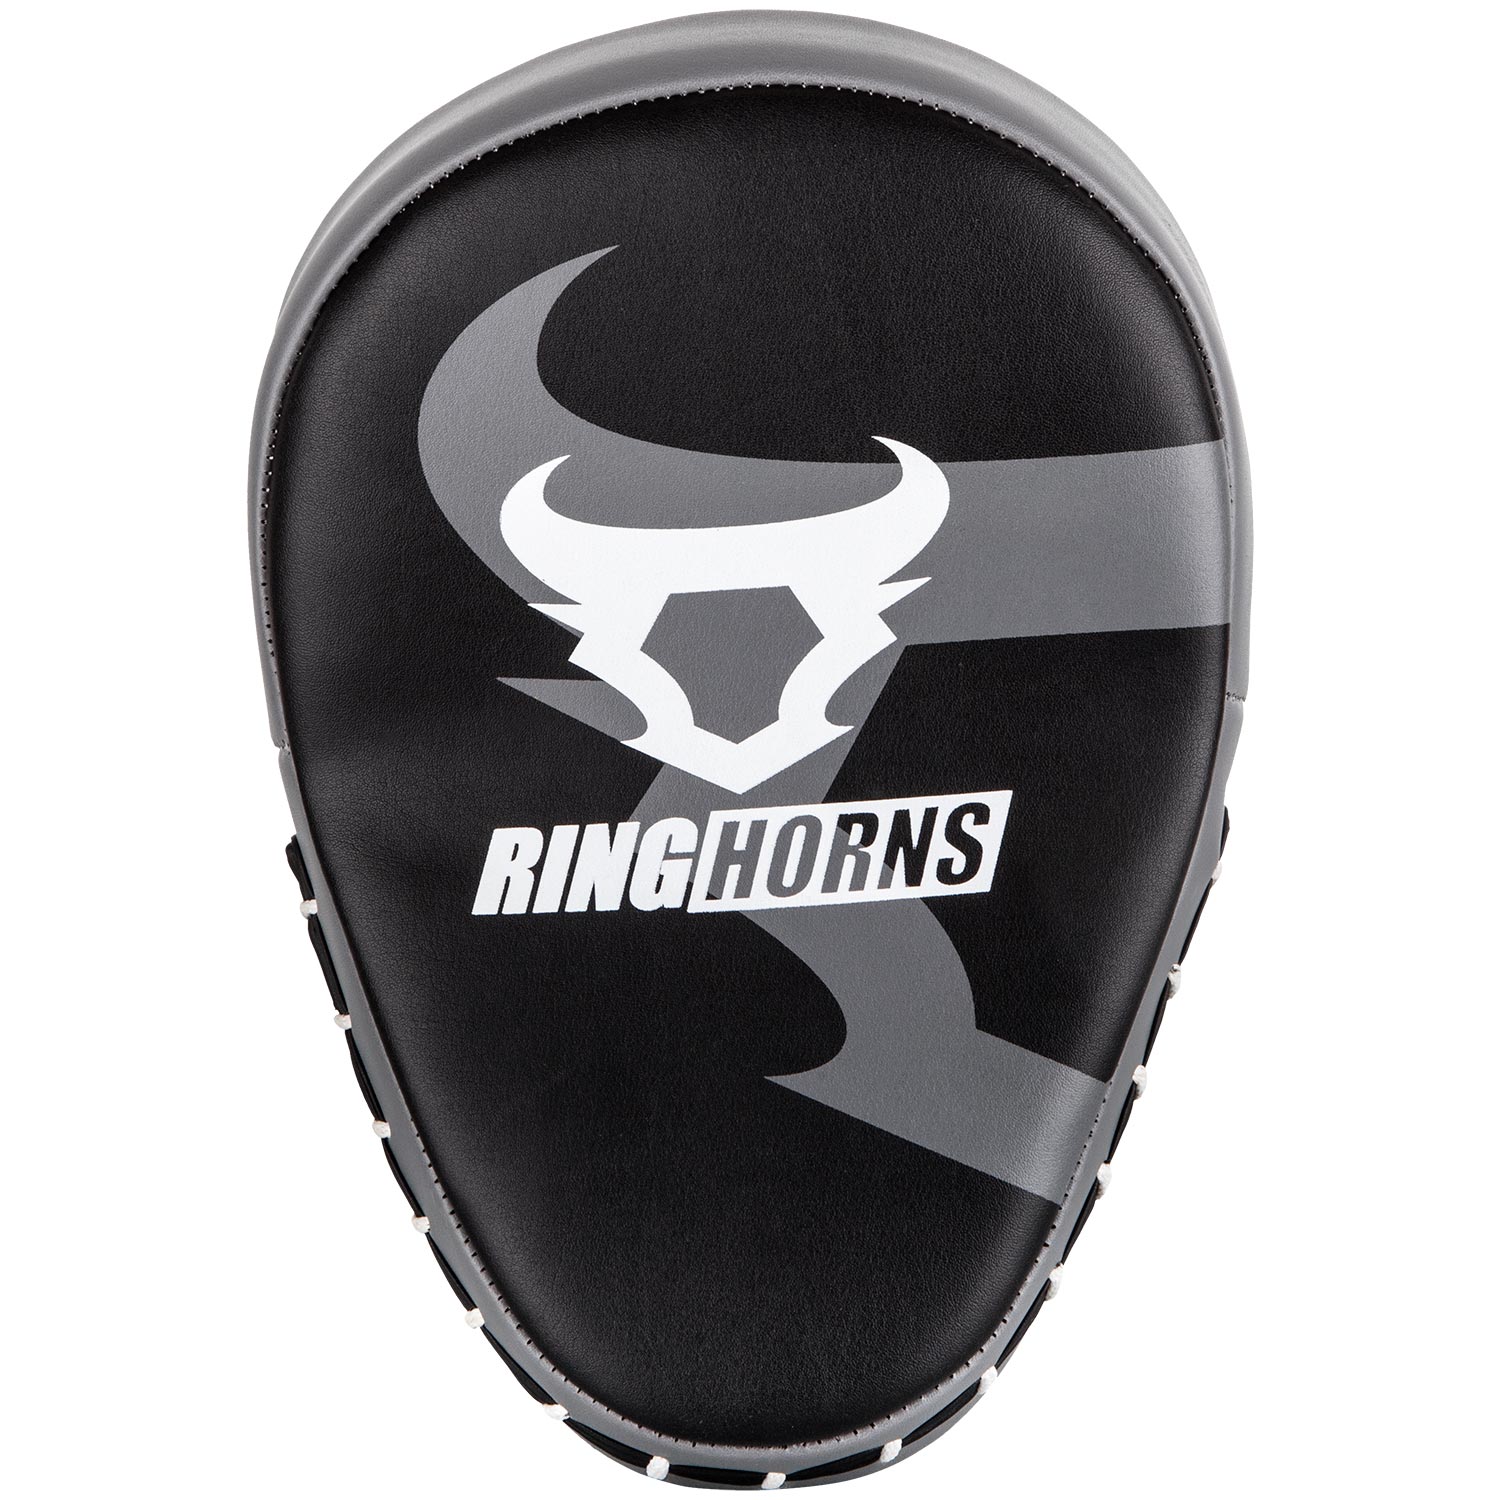 Ringhorns Charger Punch Mitts - image 2 of 10